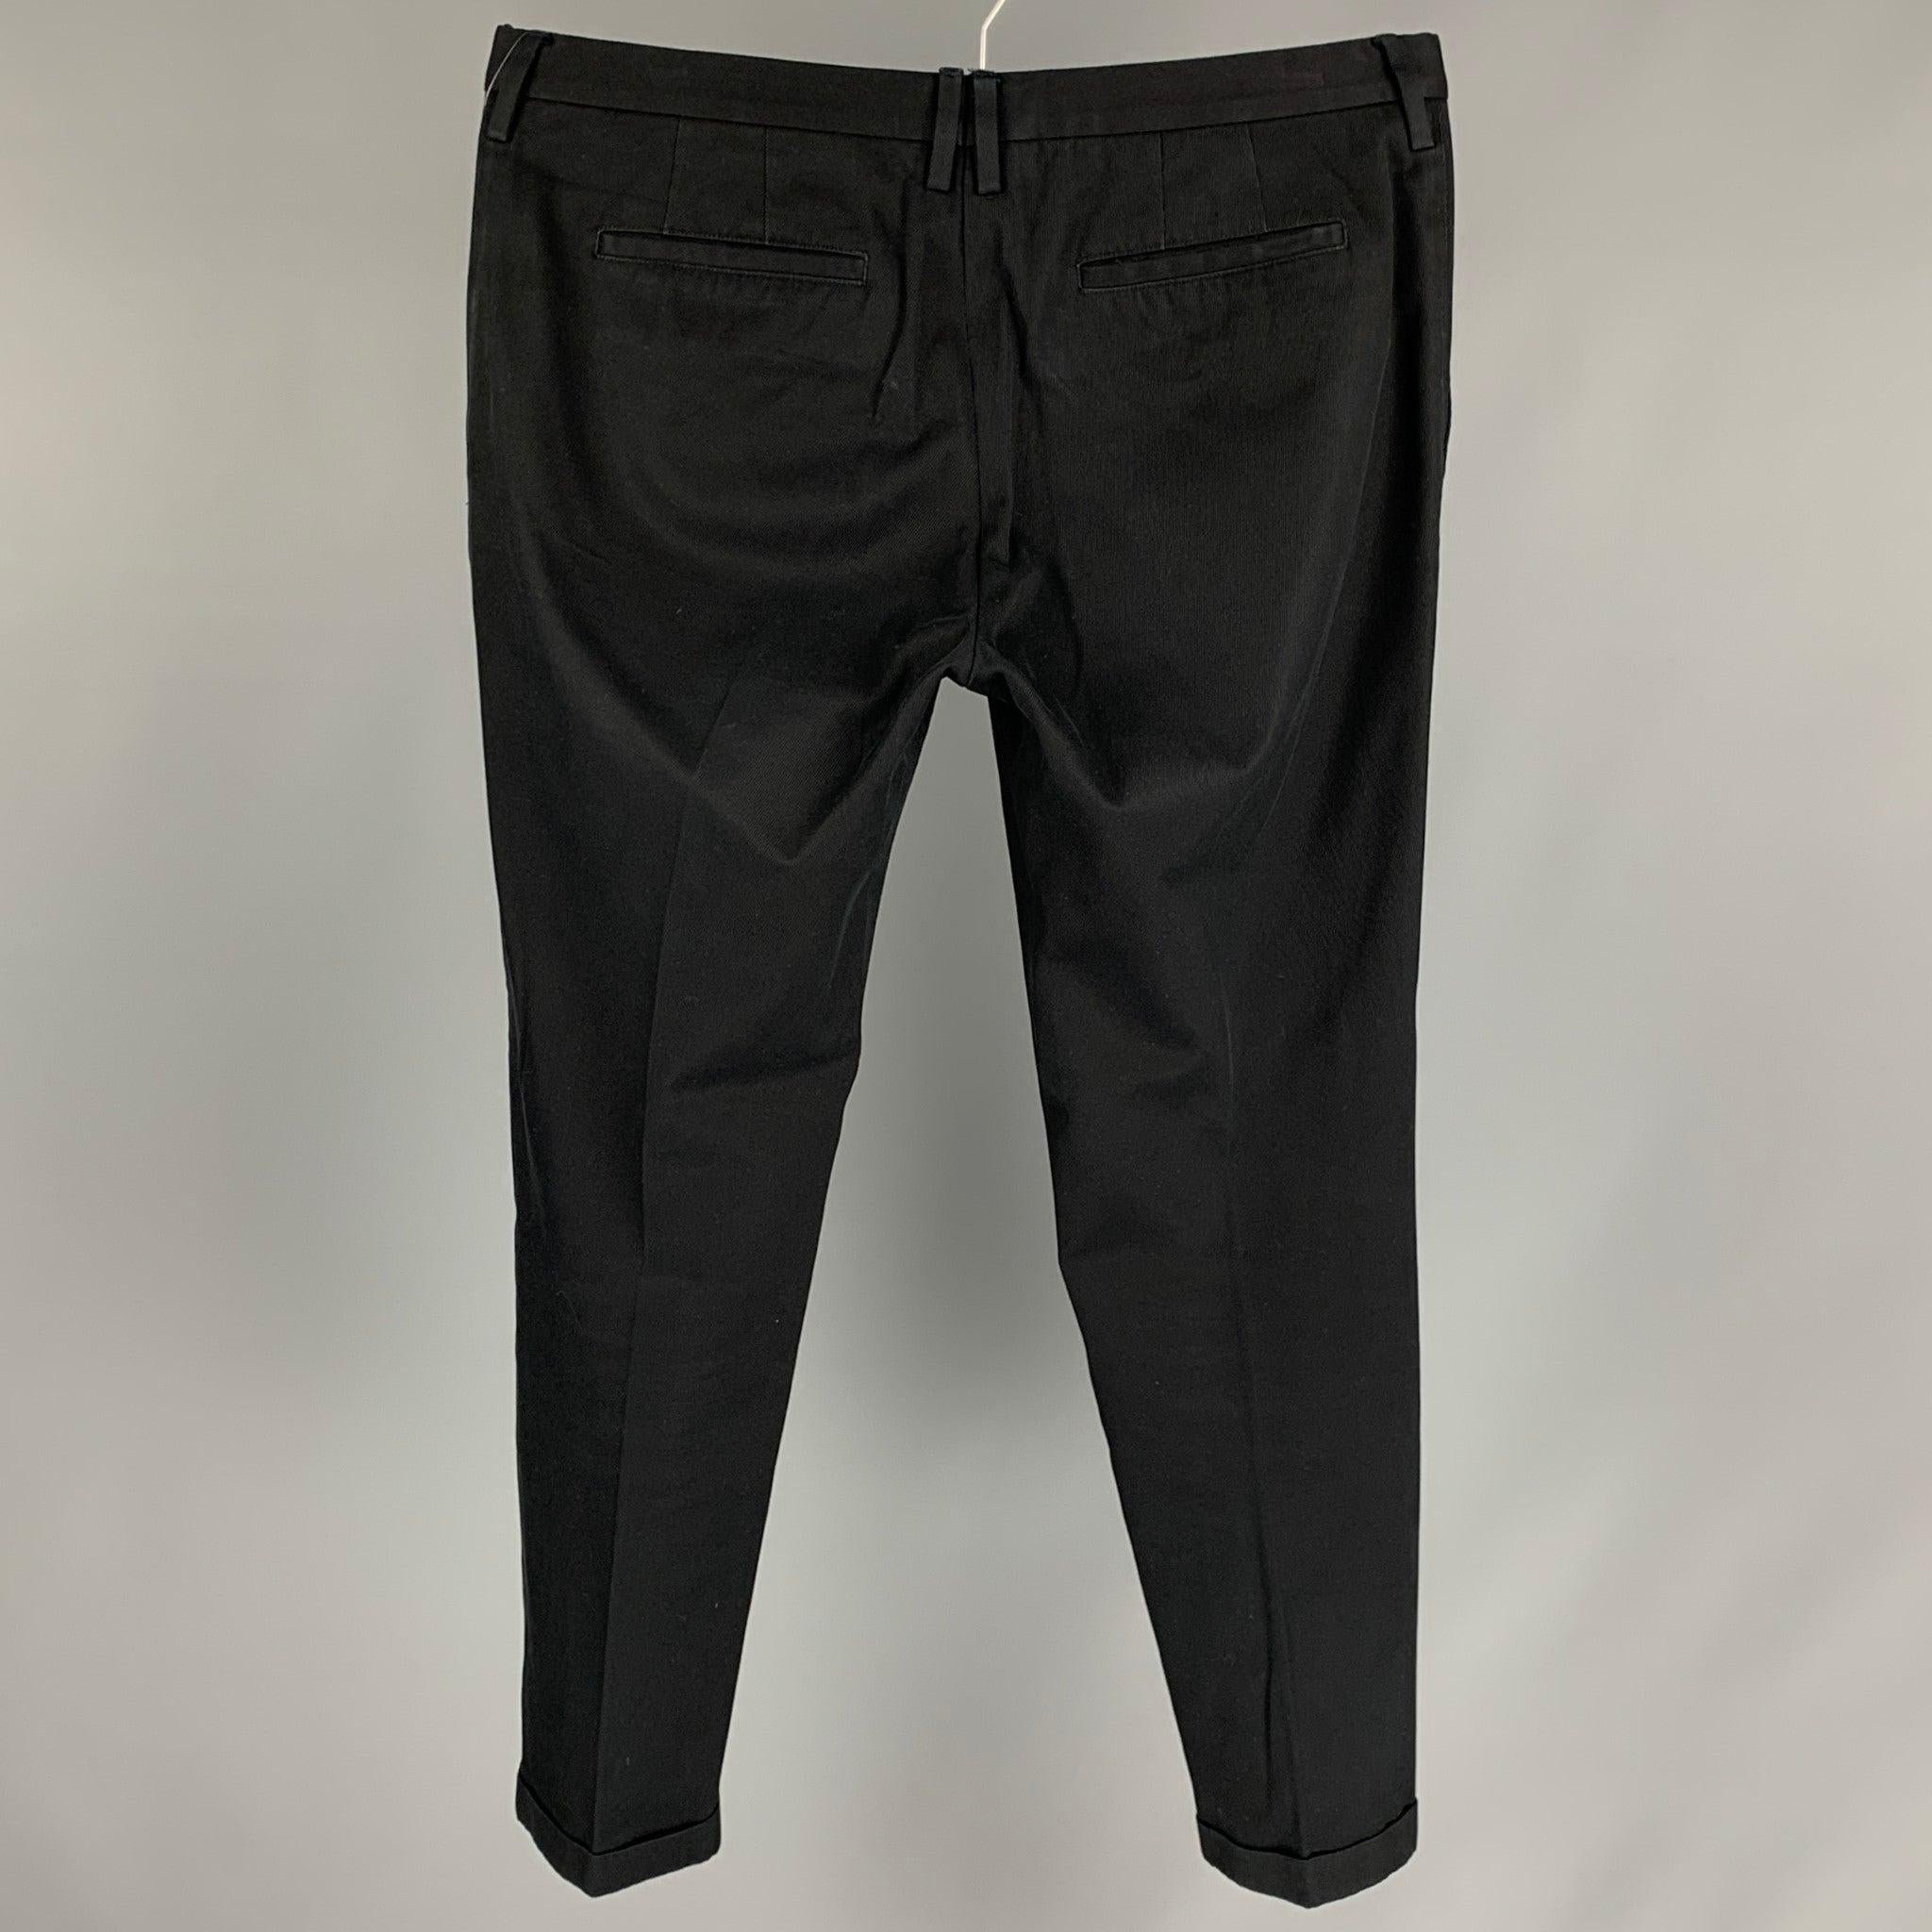 PAUL SMITH casual pants comes in a black cotton featuring a chino style, cuffed leg, and a zip fly closure. Made in Portugal. Very Good
Pre-Owned Condition. 

Marked:   36 

Measurements: 
  Waist: 34 inches  Rise: 10.5 inches  Inseam: 28 inches 
 